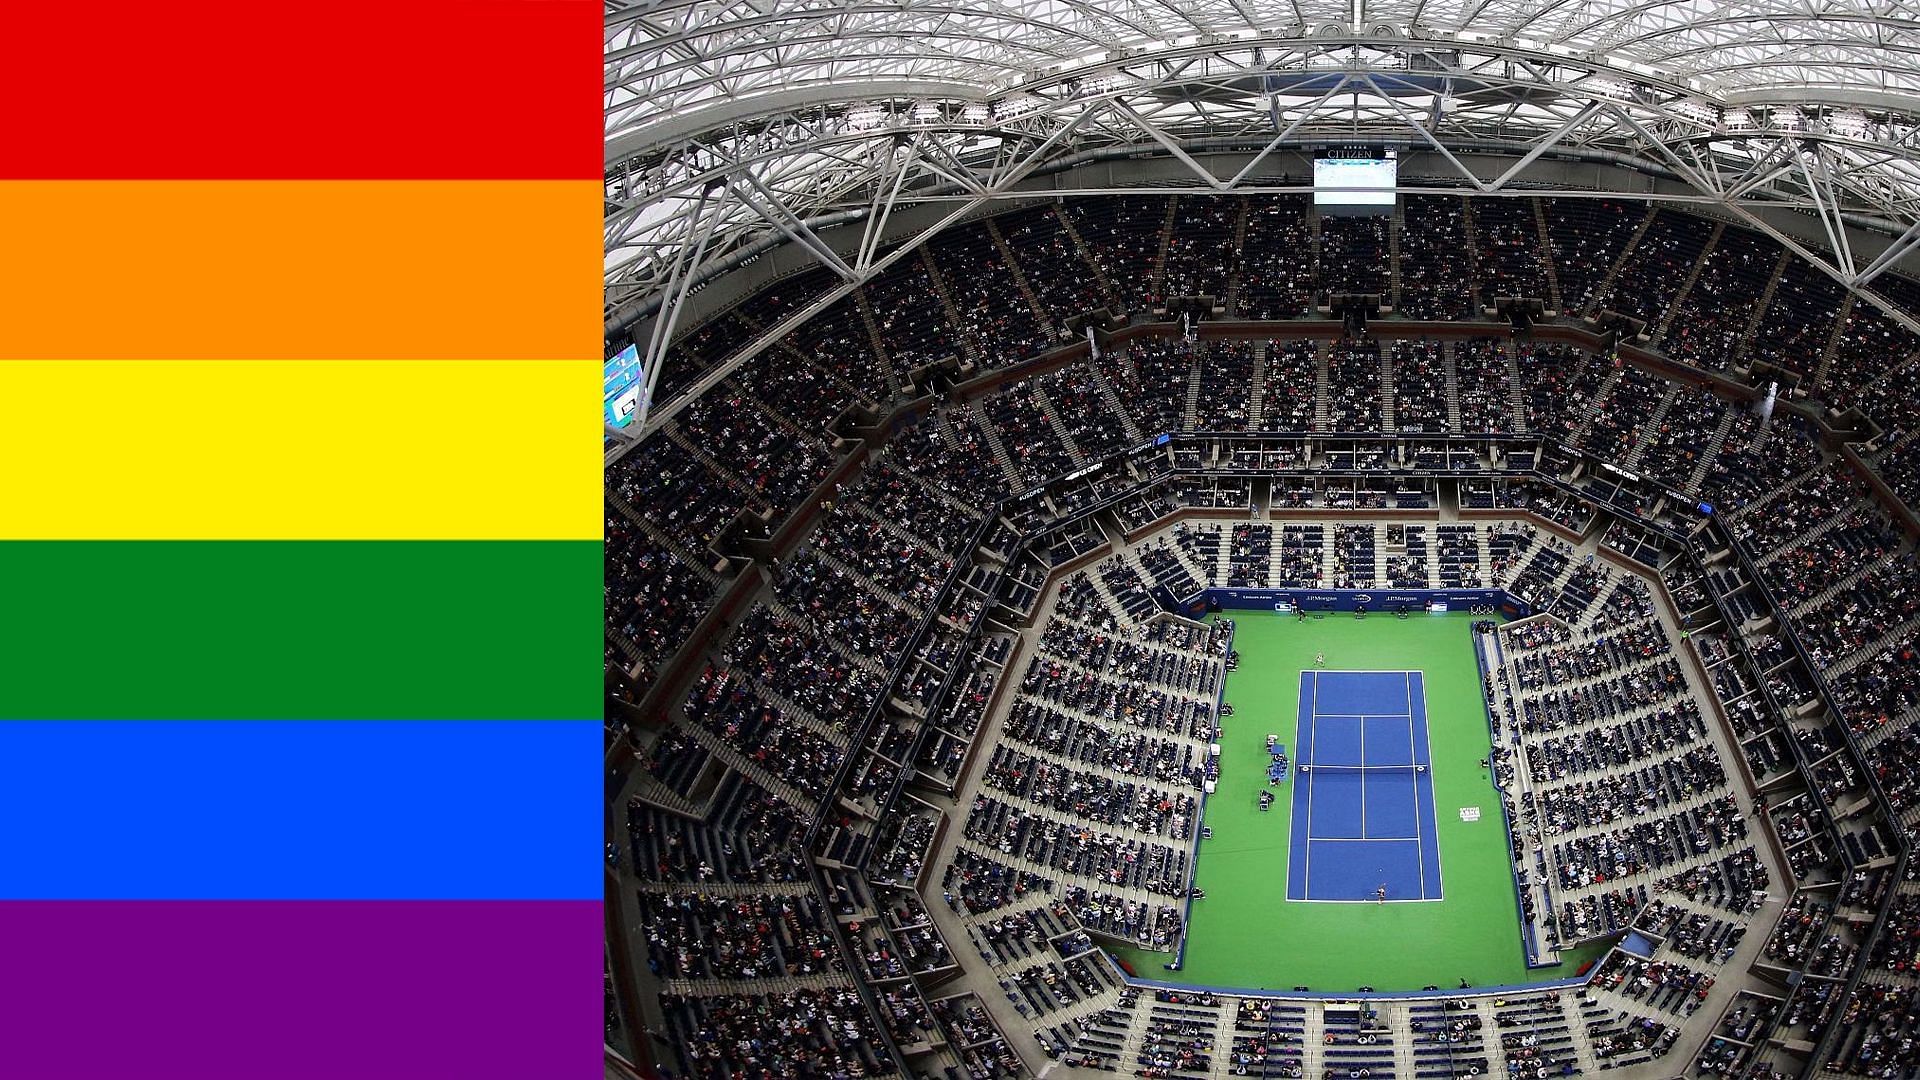 US Open receives designation of being a safe space for LGBTQ+ community by New York City